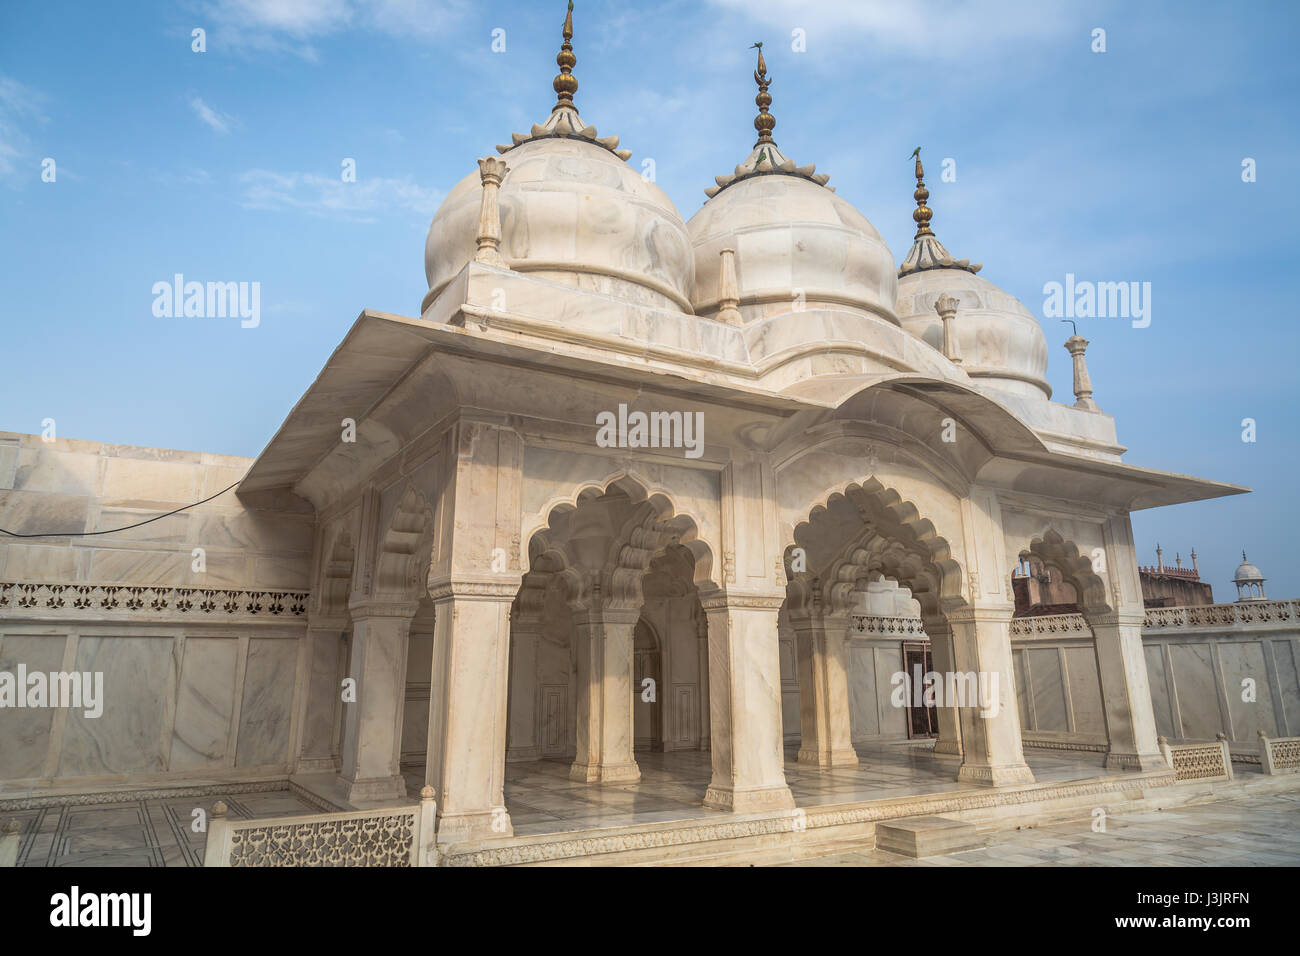 Nagina Masjid is a mosque inside Agra Fort built by the Mughal emperor Shah Jahan in 1635 AD for use by the ladies of the harem. Stock Photo